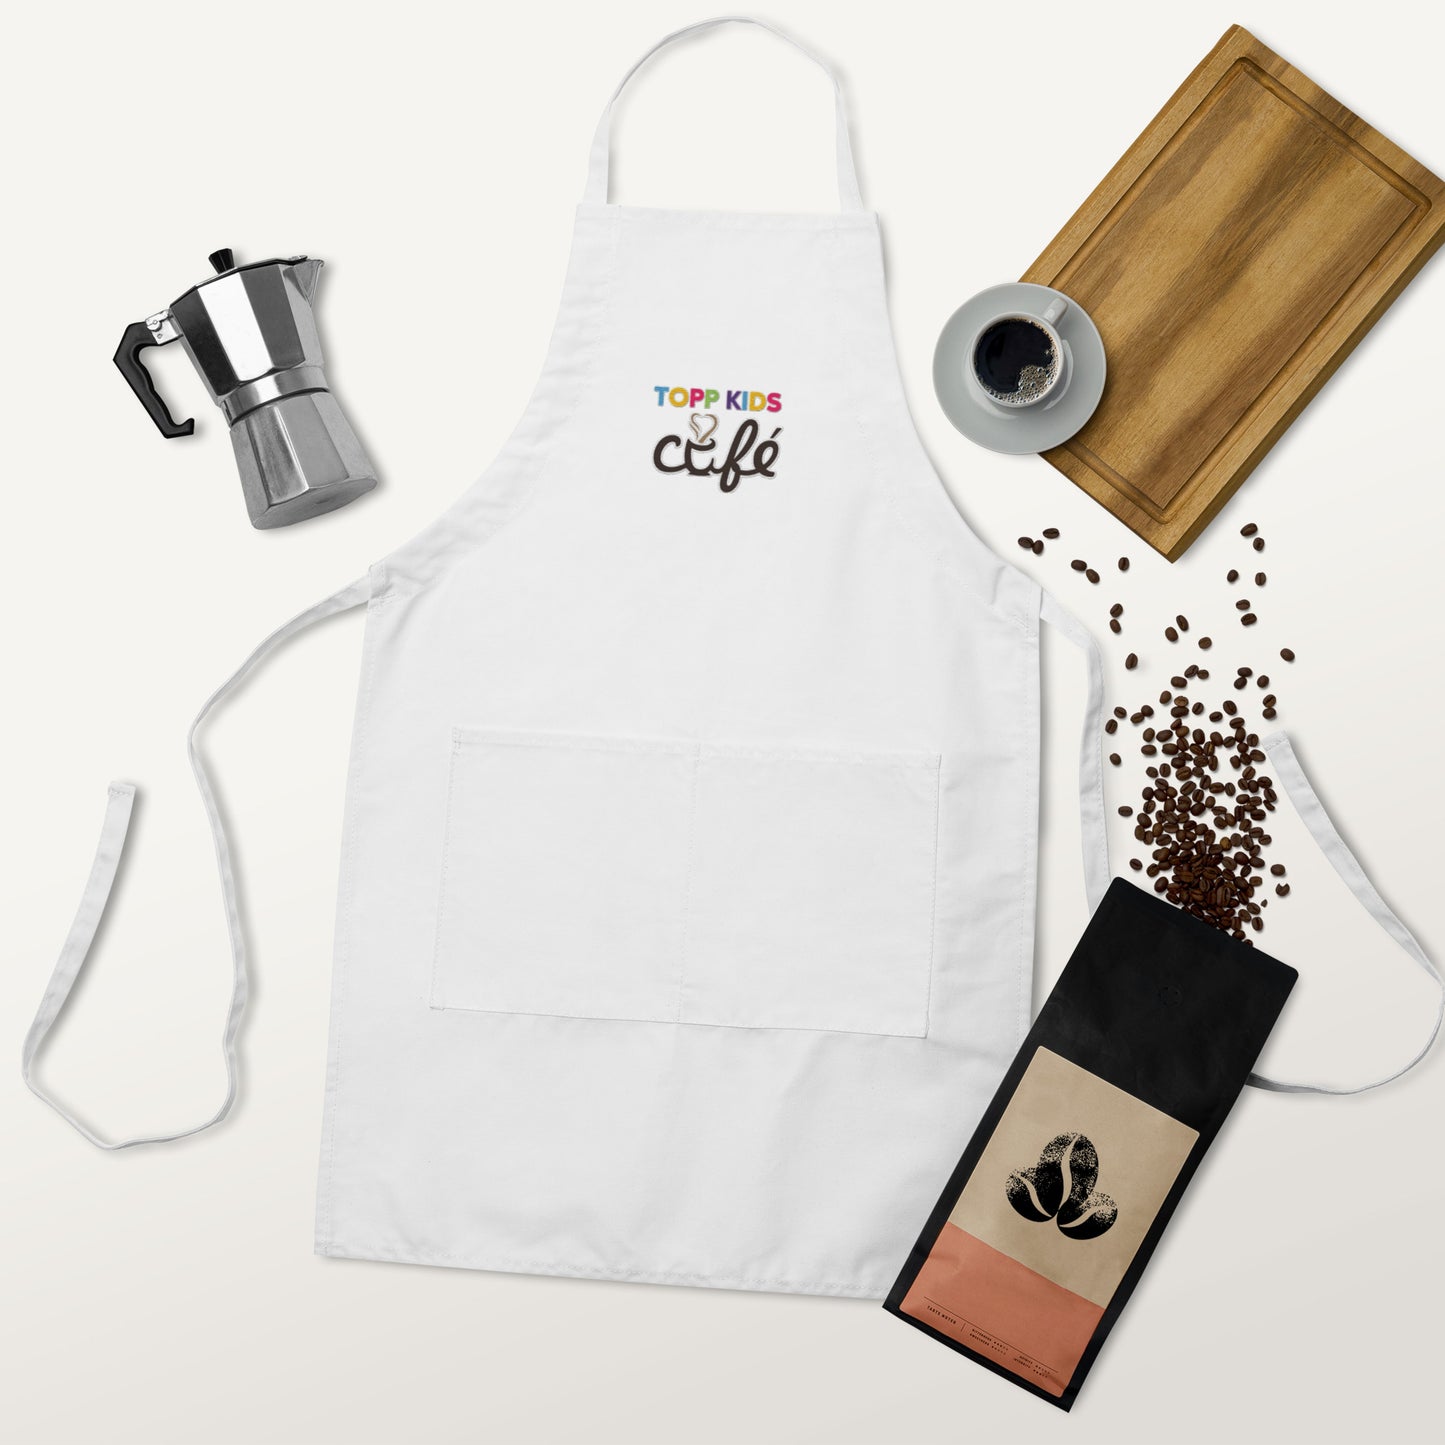 TK CAFE - Embroidered Apron